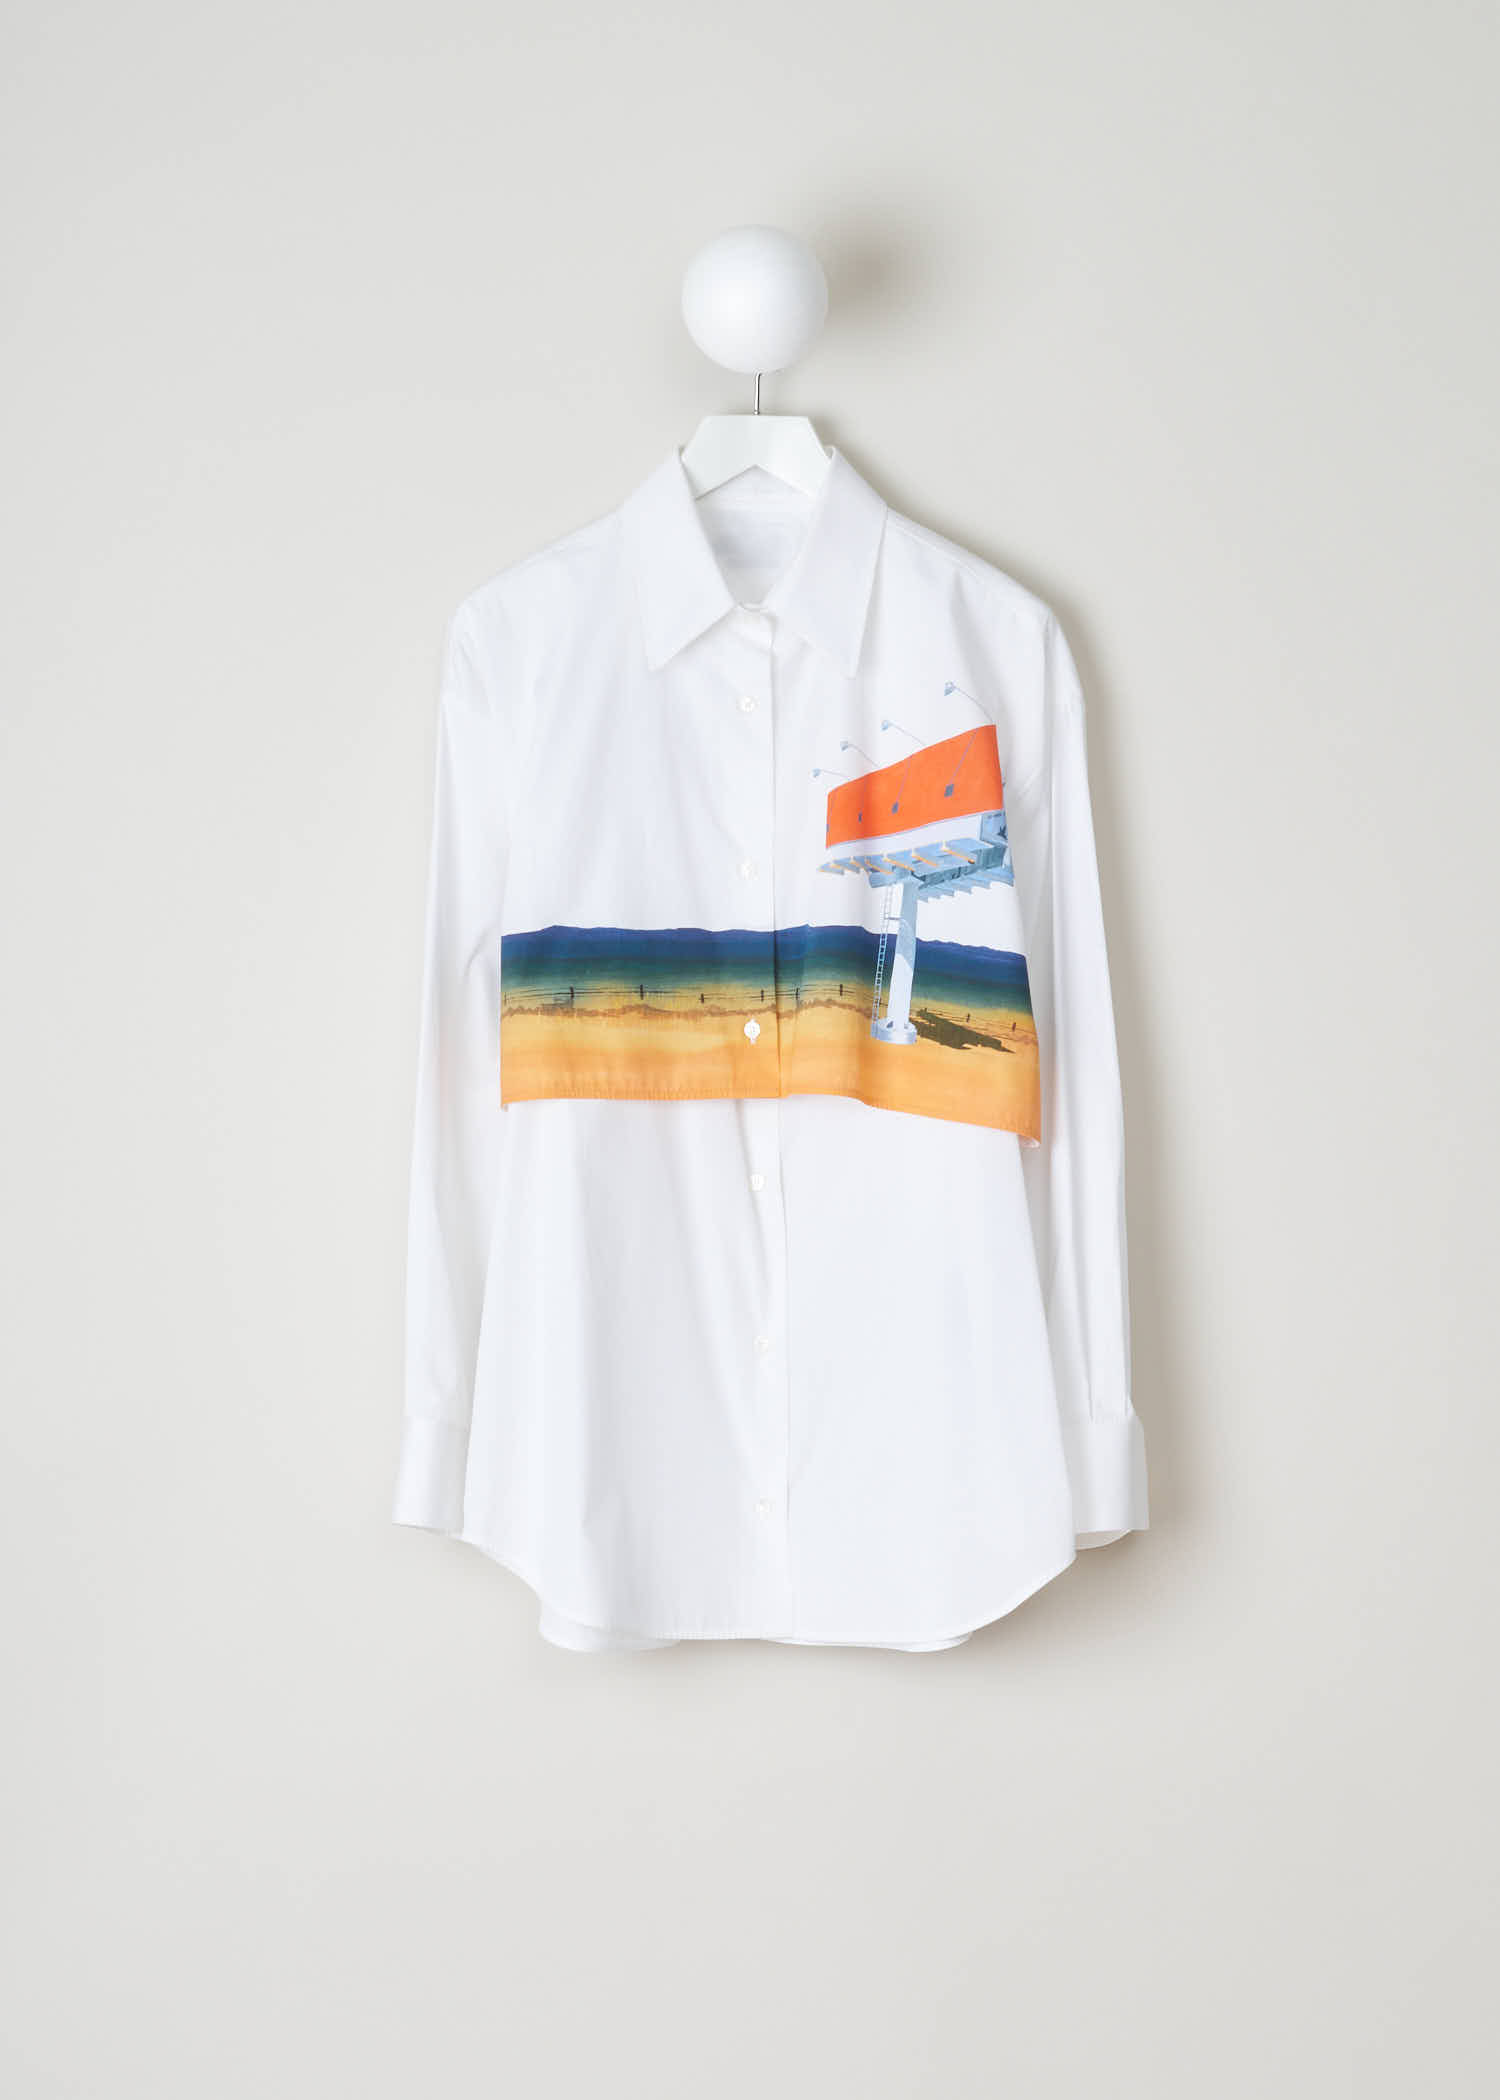 Calvin Klein 205W39nyc Double-layered cotton shirt 91WWTE04_C507A_191 front. This shirt is shaped for a loose fit, has a classic point collar and long sleeves. The layered chest and back panel have a multicoloured landscape print, which falls over a lower body part.